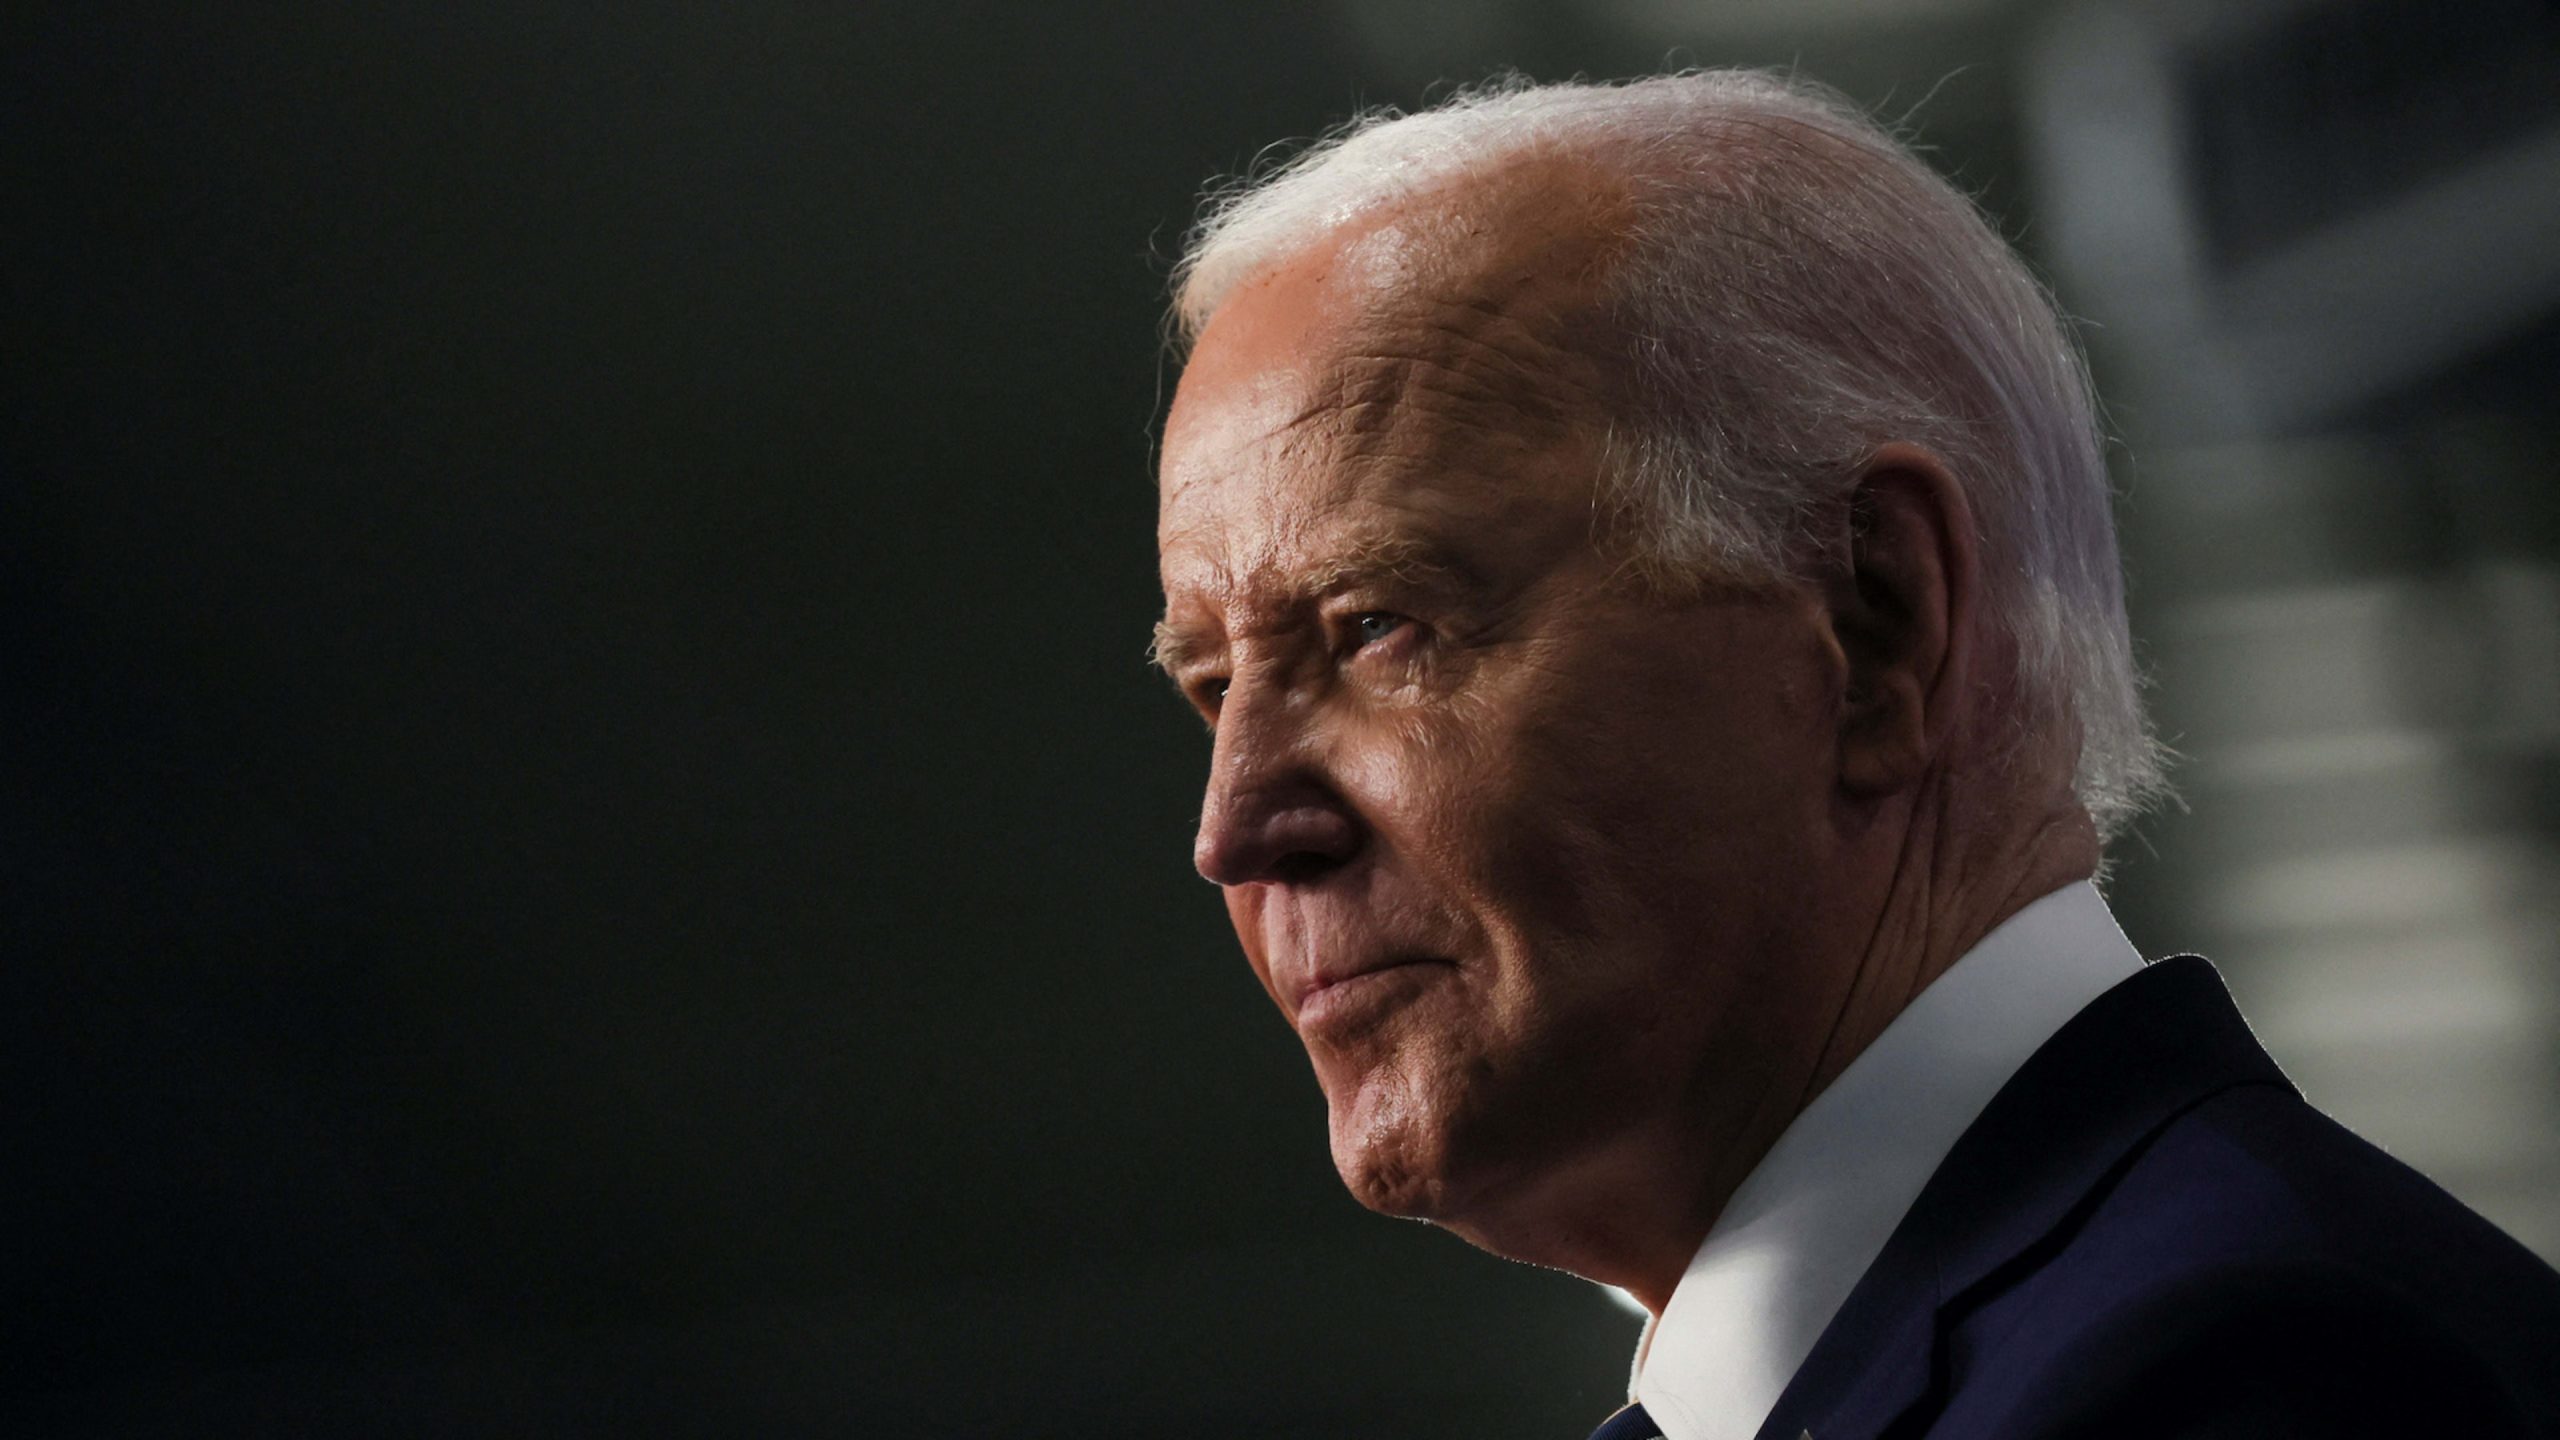 Biden overtime pay rule goes too far, business groups say in lawsuit